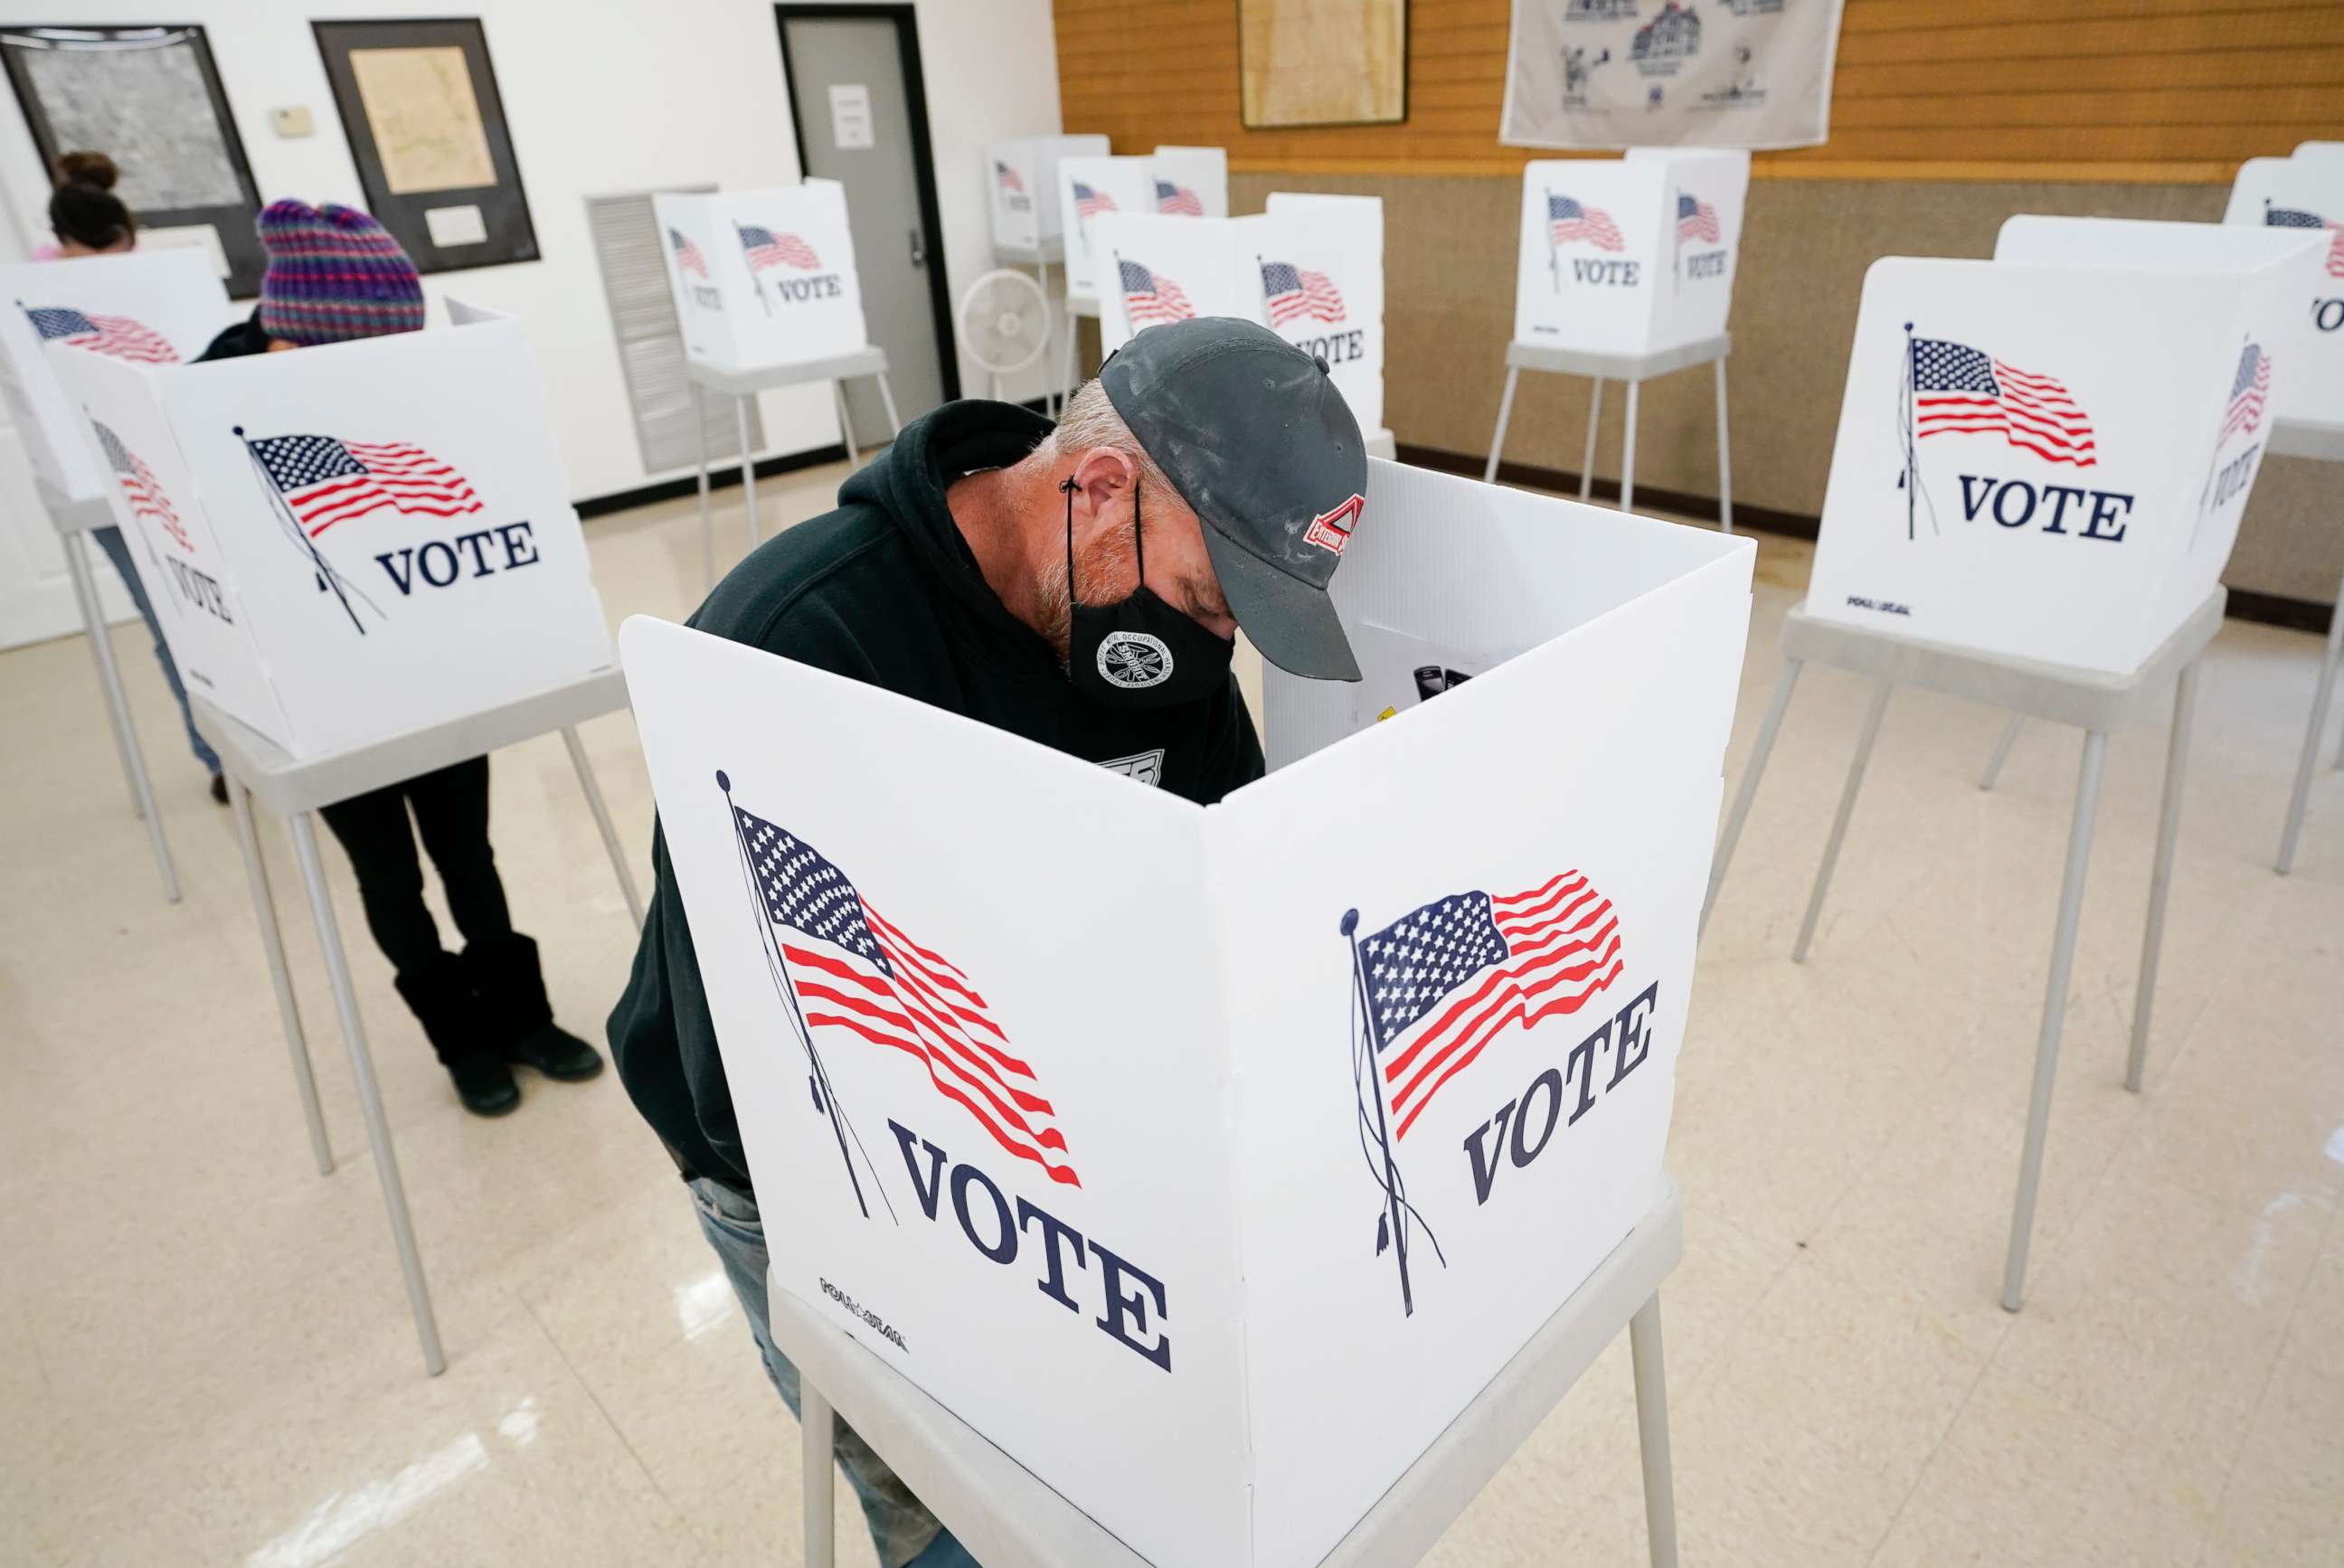 PHOTO: Chris Helps, of Earlham, Iowa, fills out his ballot during early voting, Tuesday, Oct. 20, 2020, in Adel, Iowa.